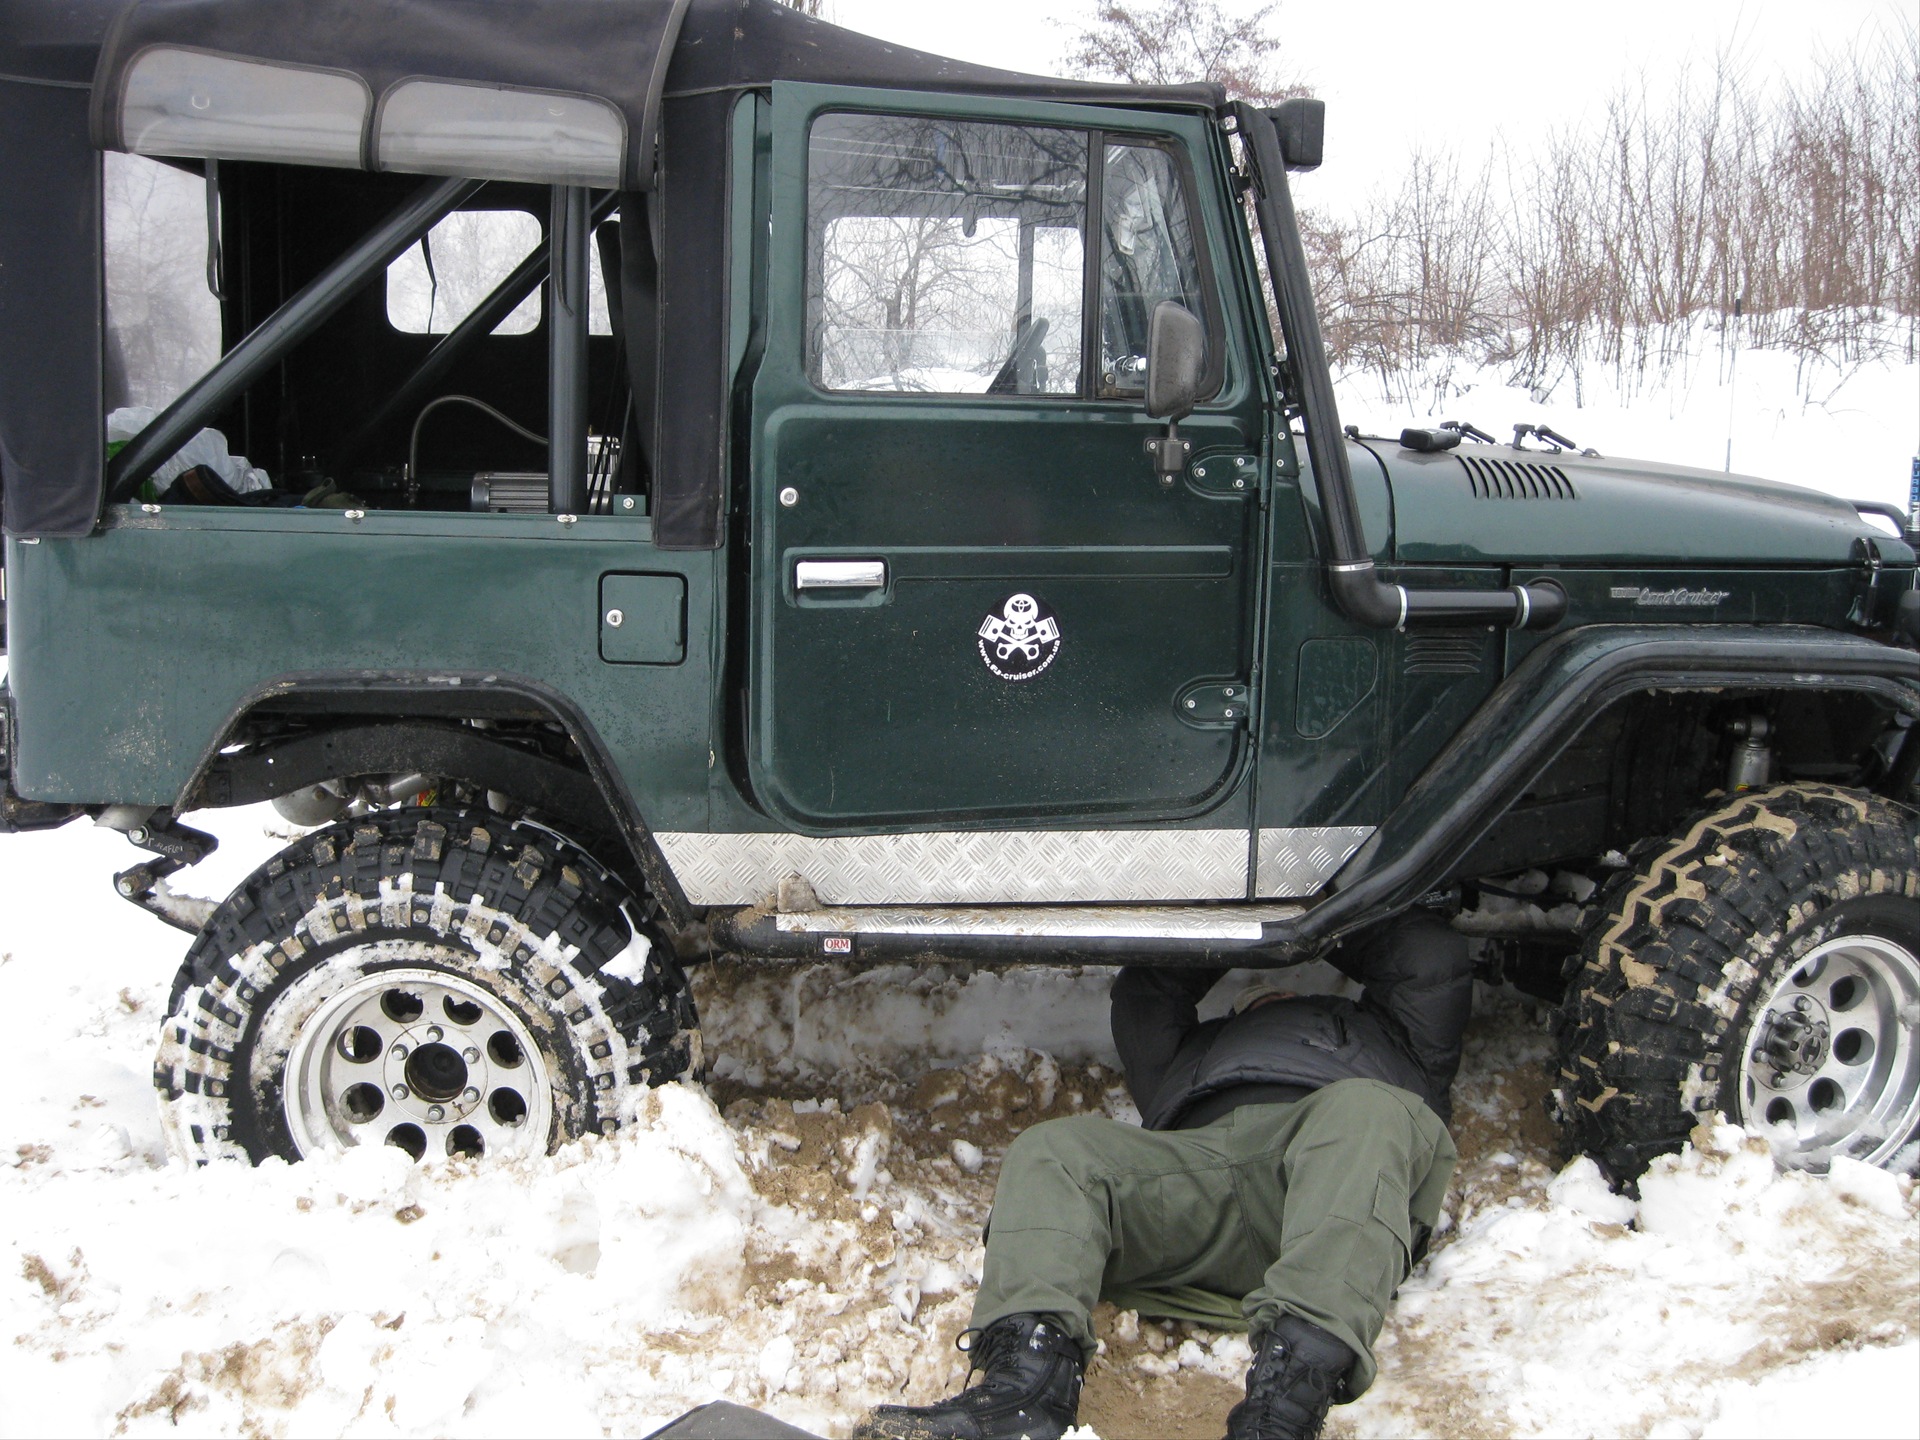 This is how the winter ride ended  - Toyota Land Cruiser 34 l 1983